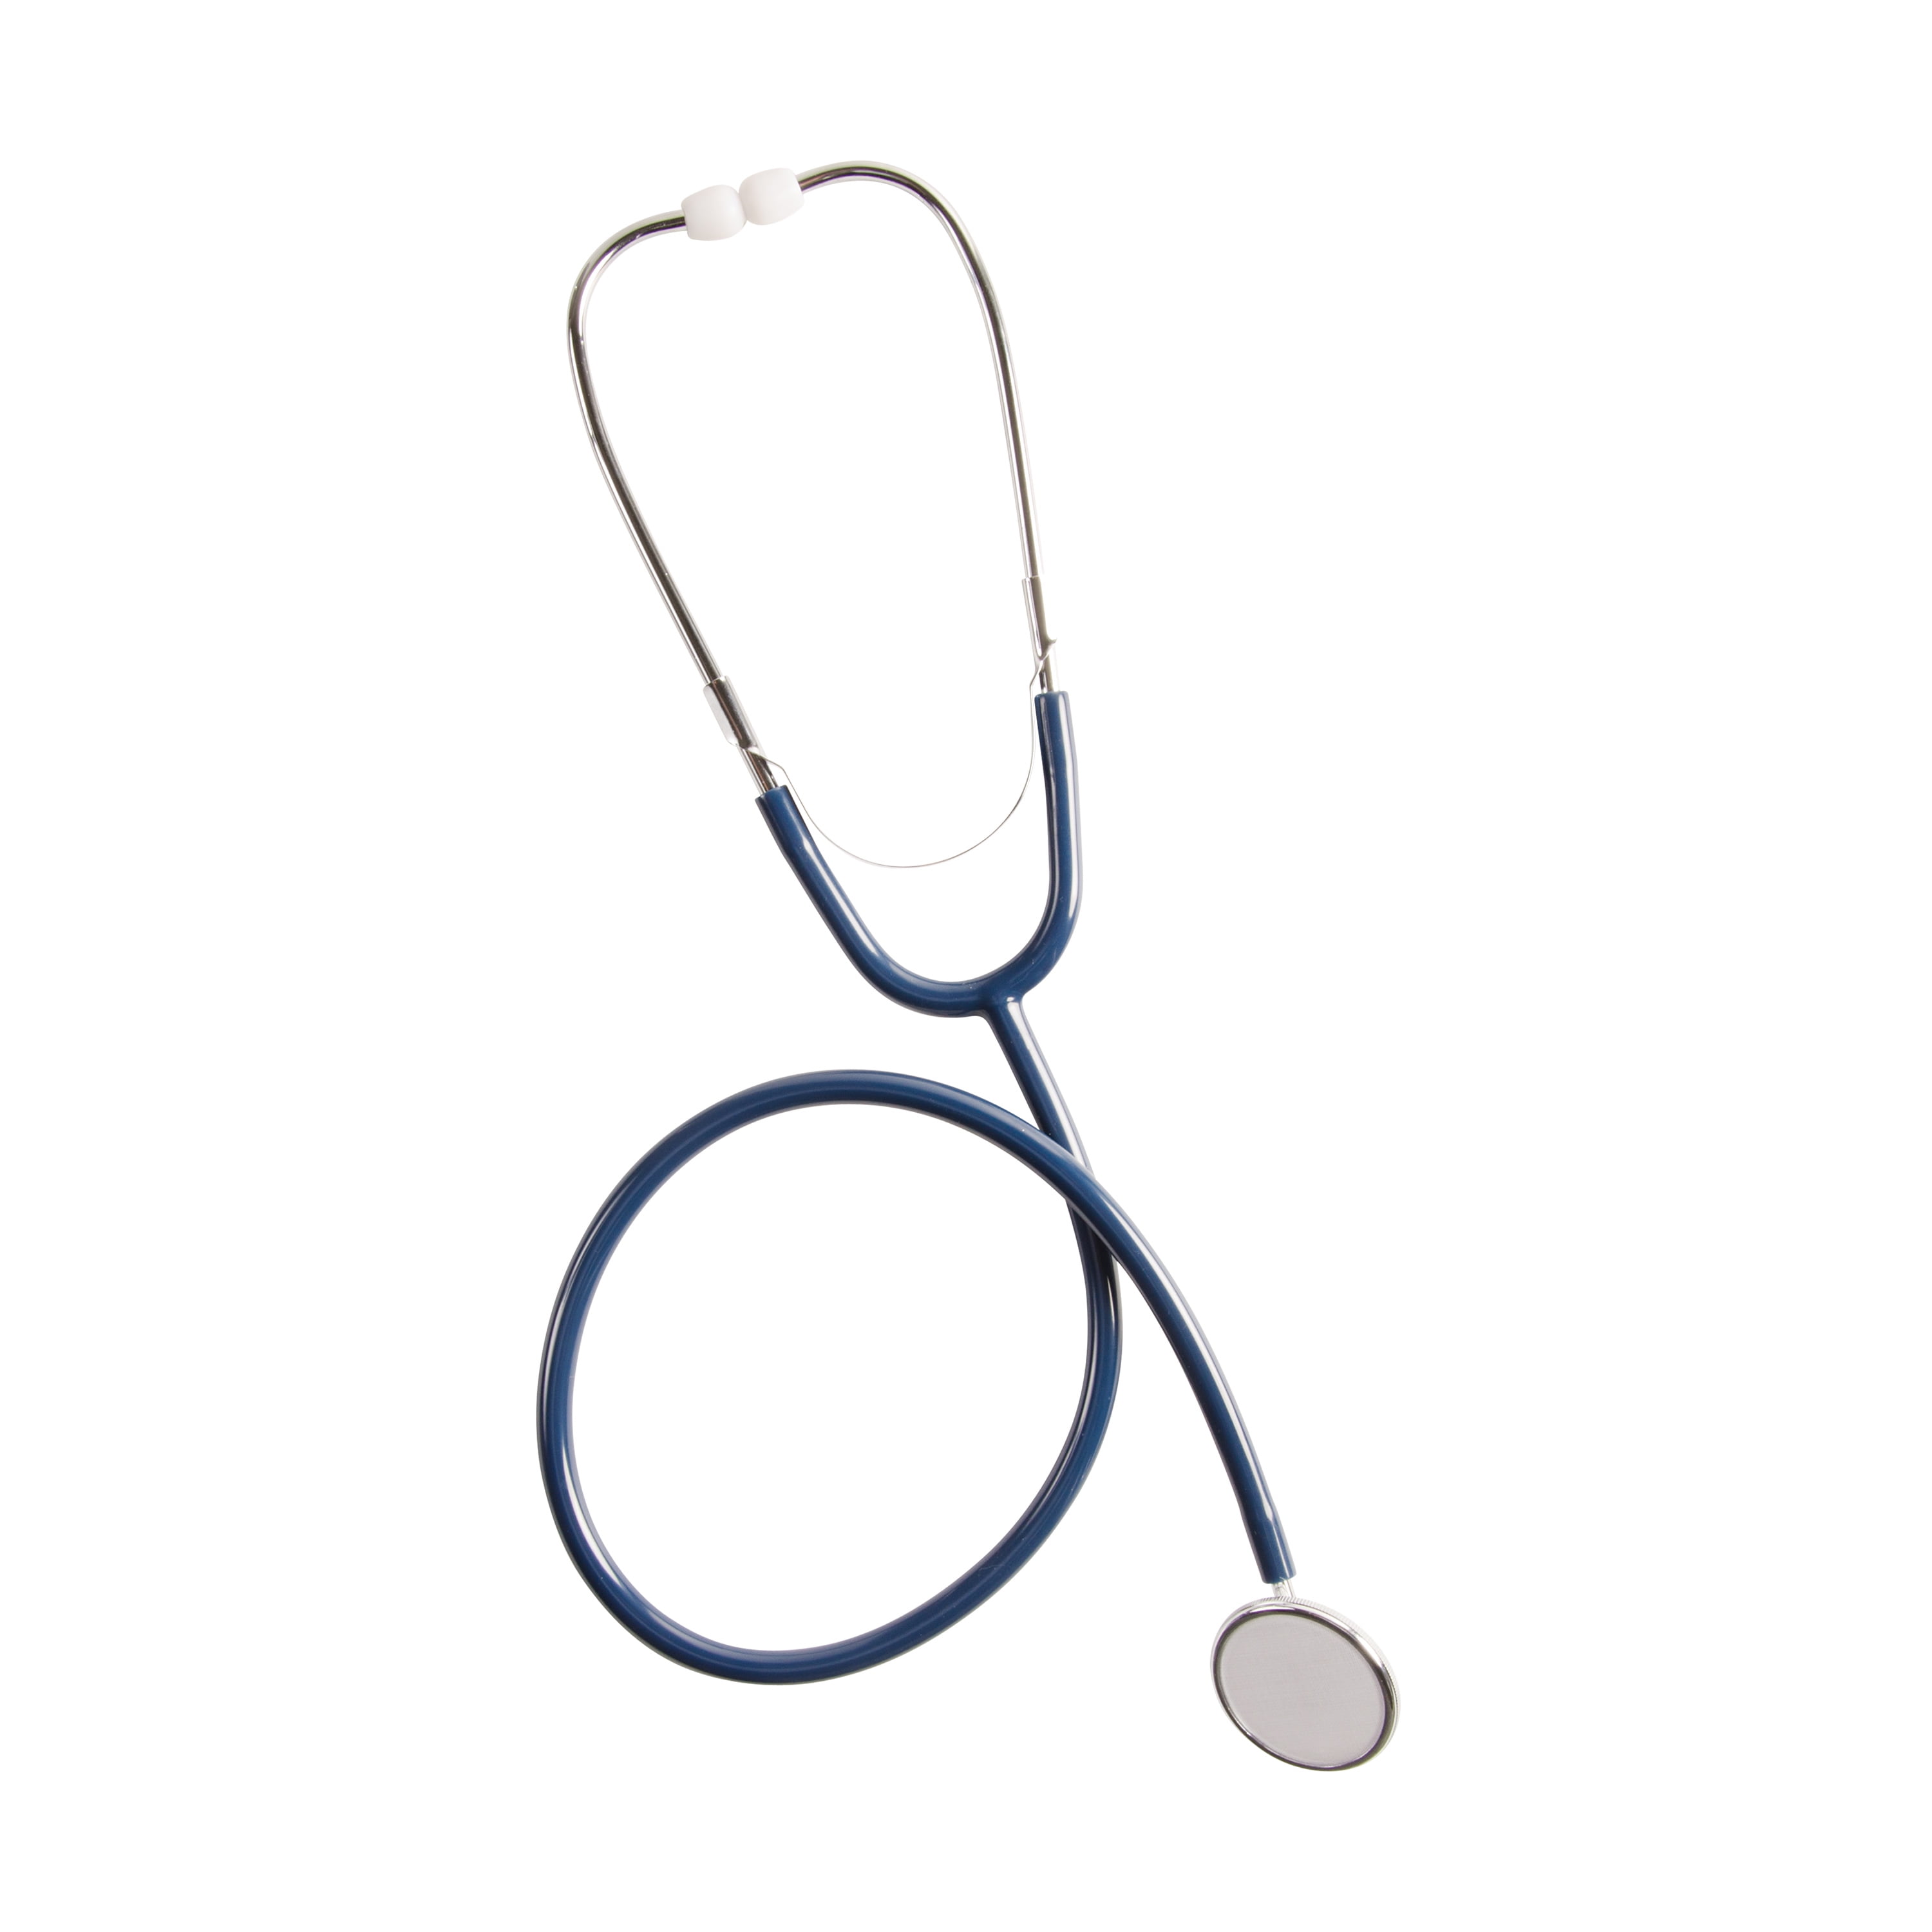 MABIS Spectrum Nurse Stethoscope for Adult in Blue 10-428-010 - The Home  Depot